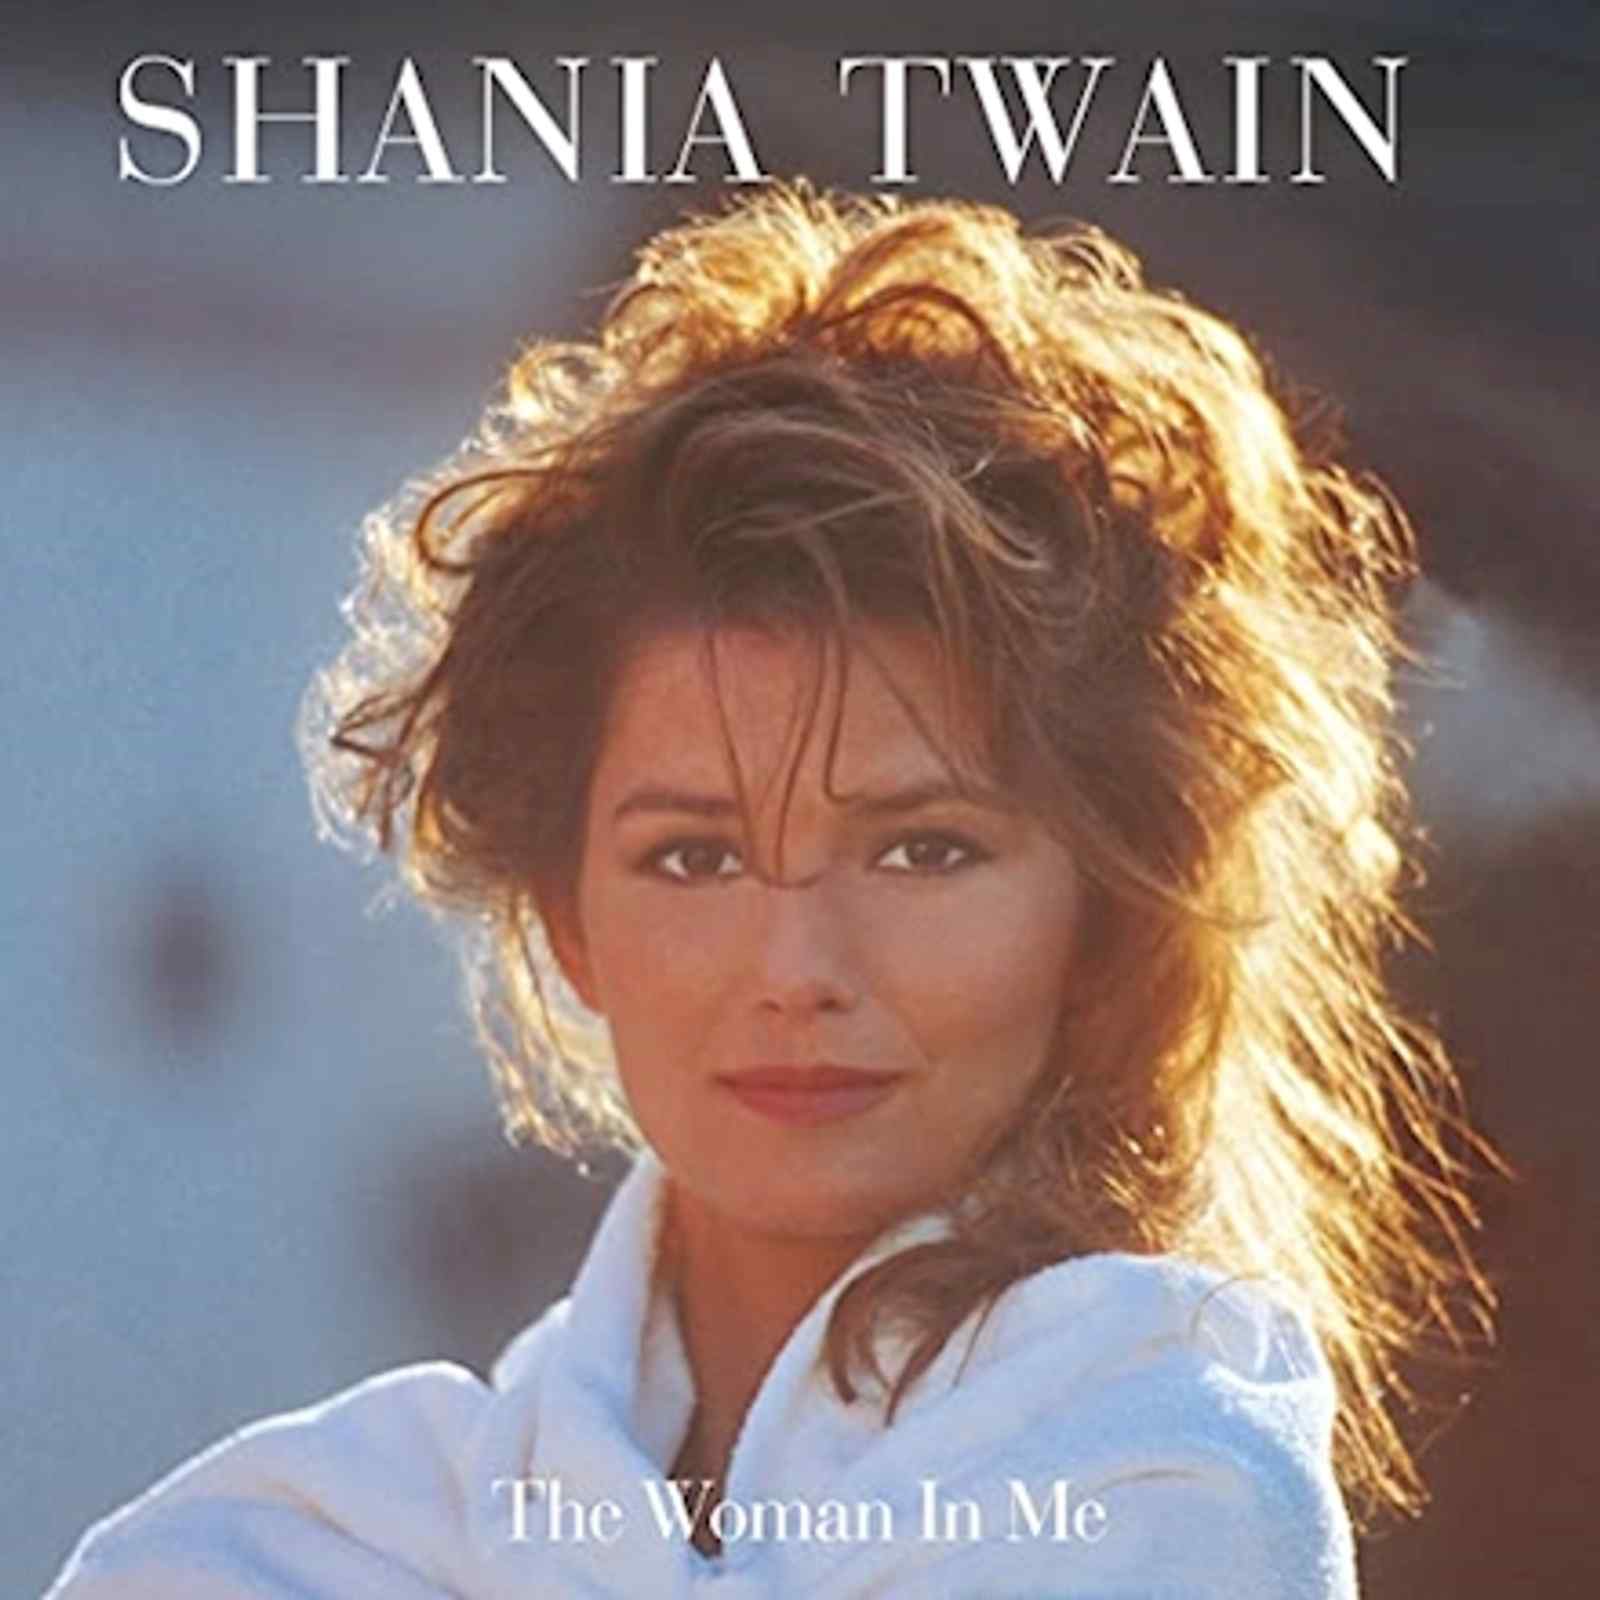 The Woman In Me (Diamond Edition) by Shania Twain